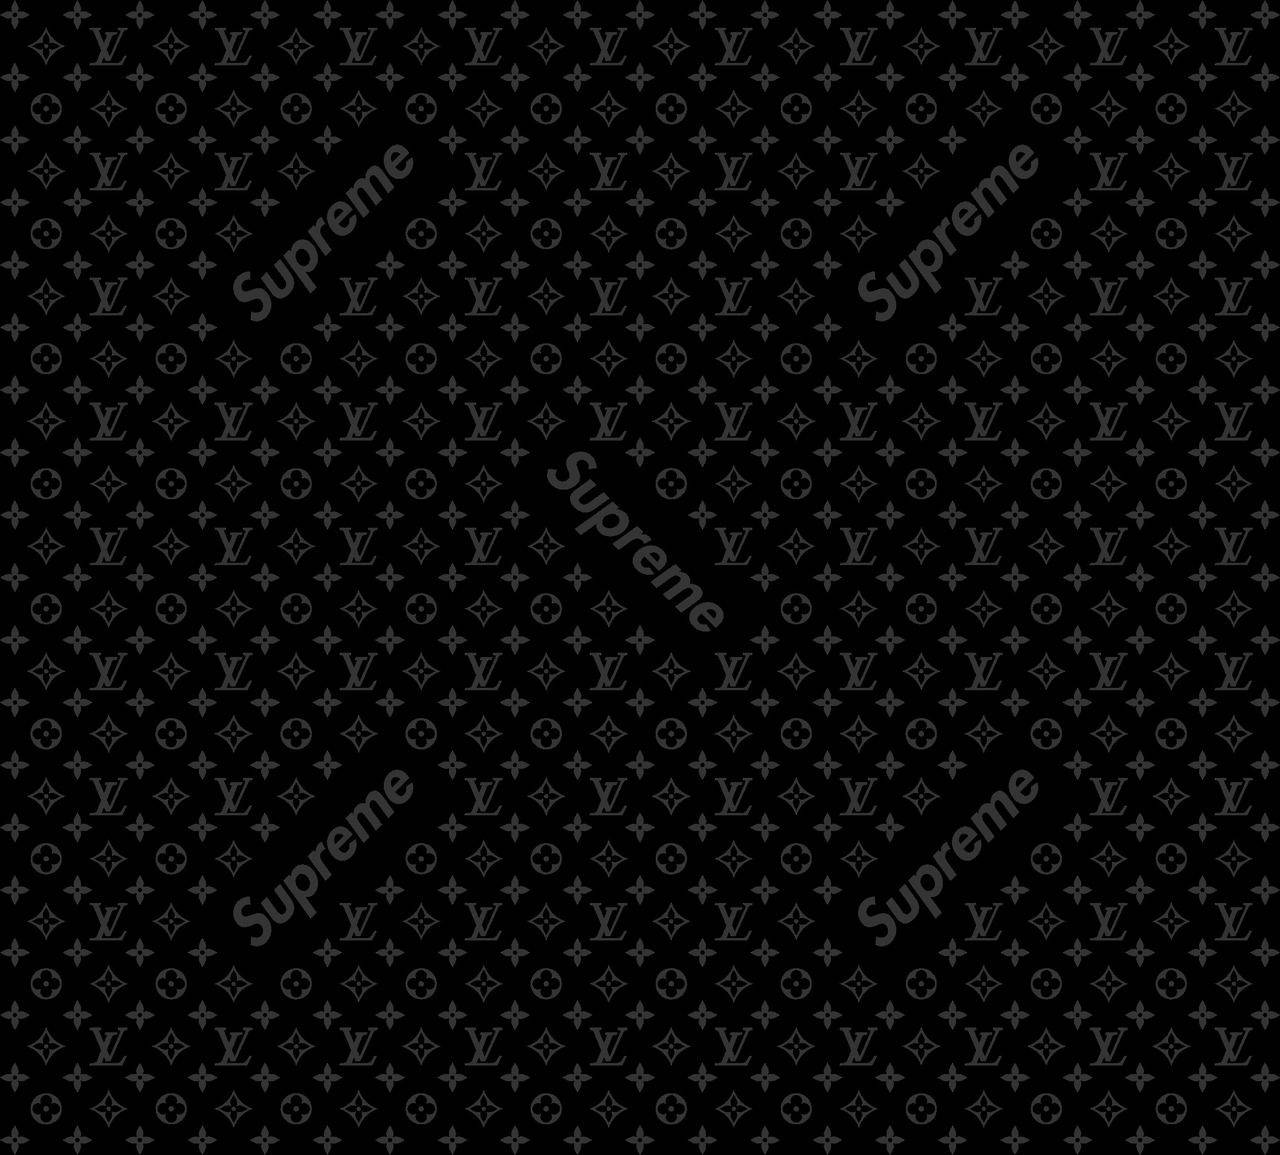 Black Supreme And Louis Vuitton Pattern Background